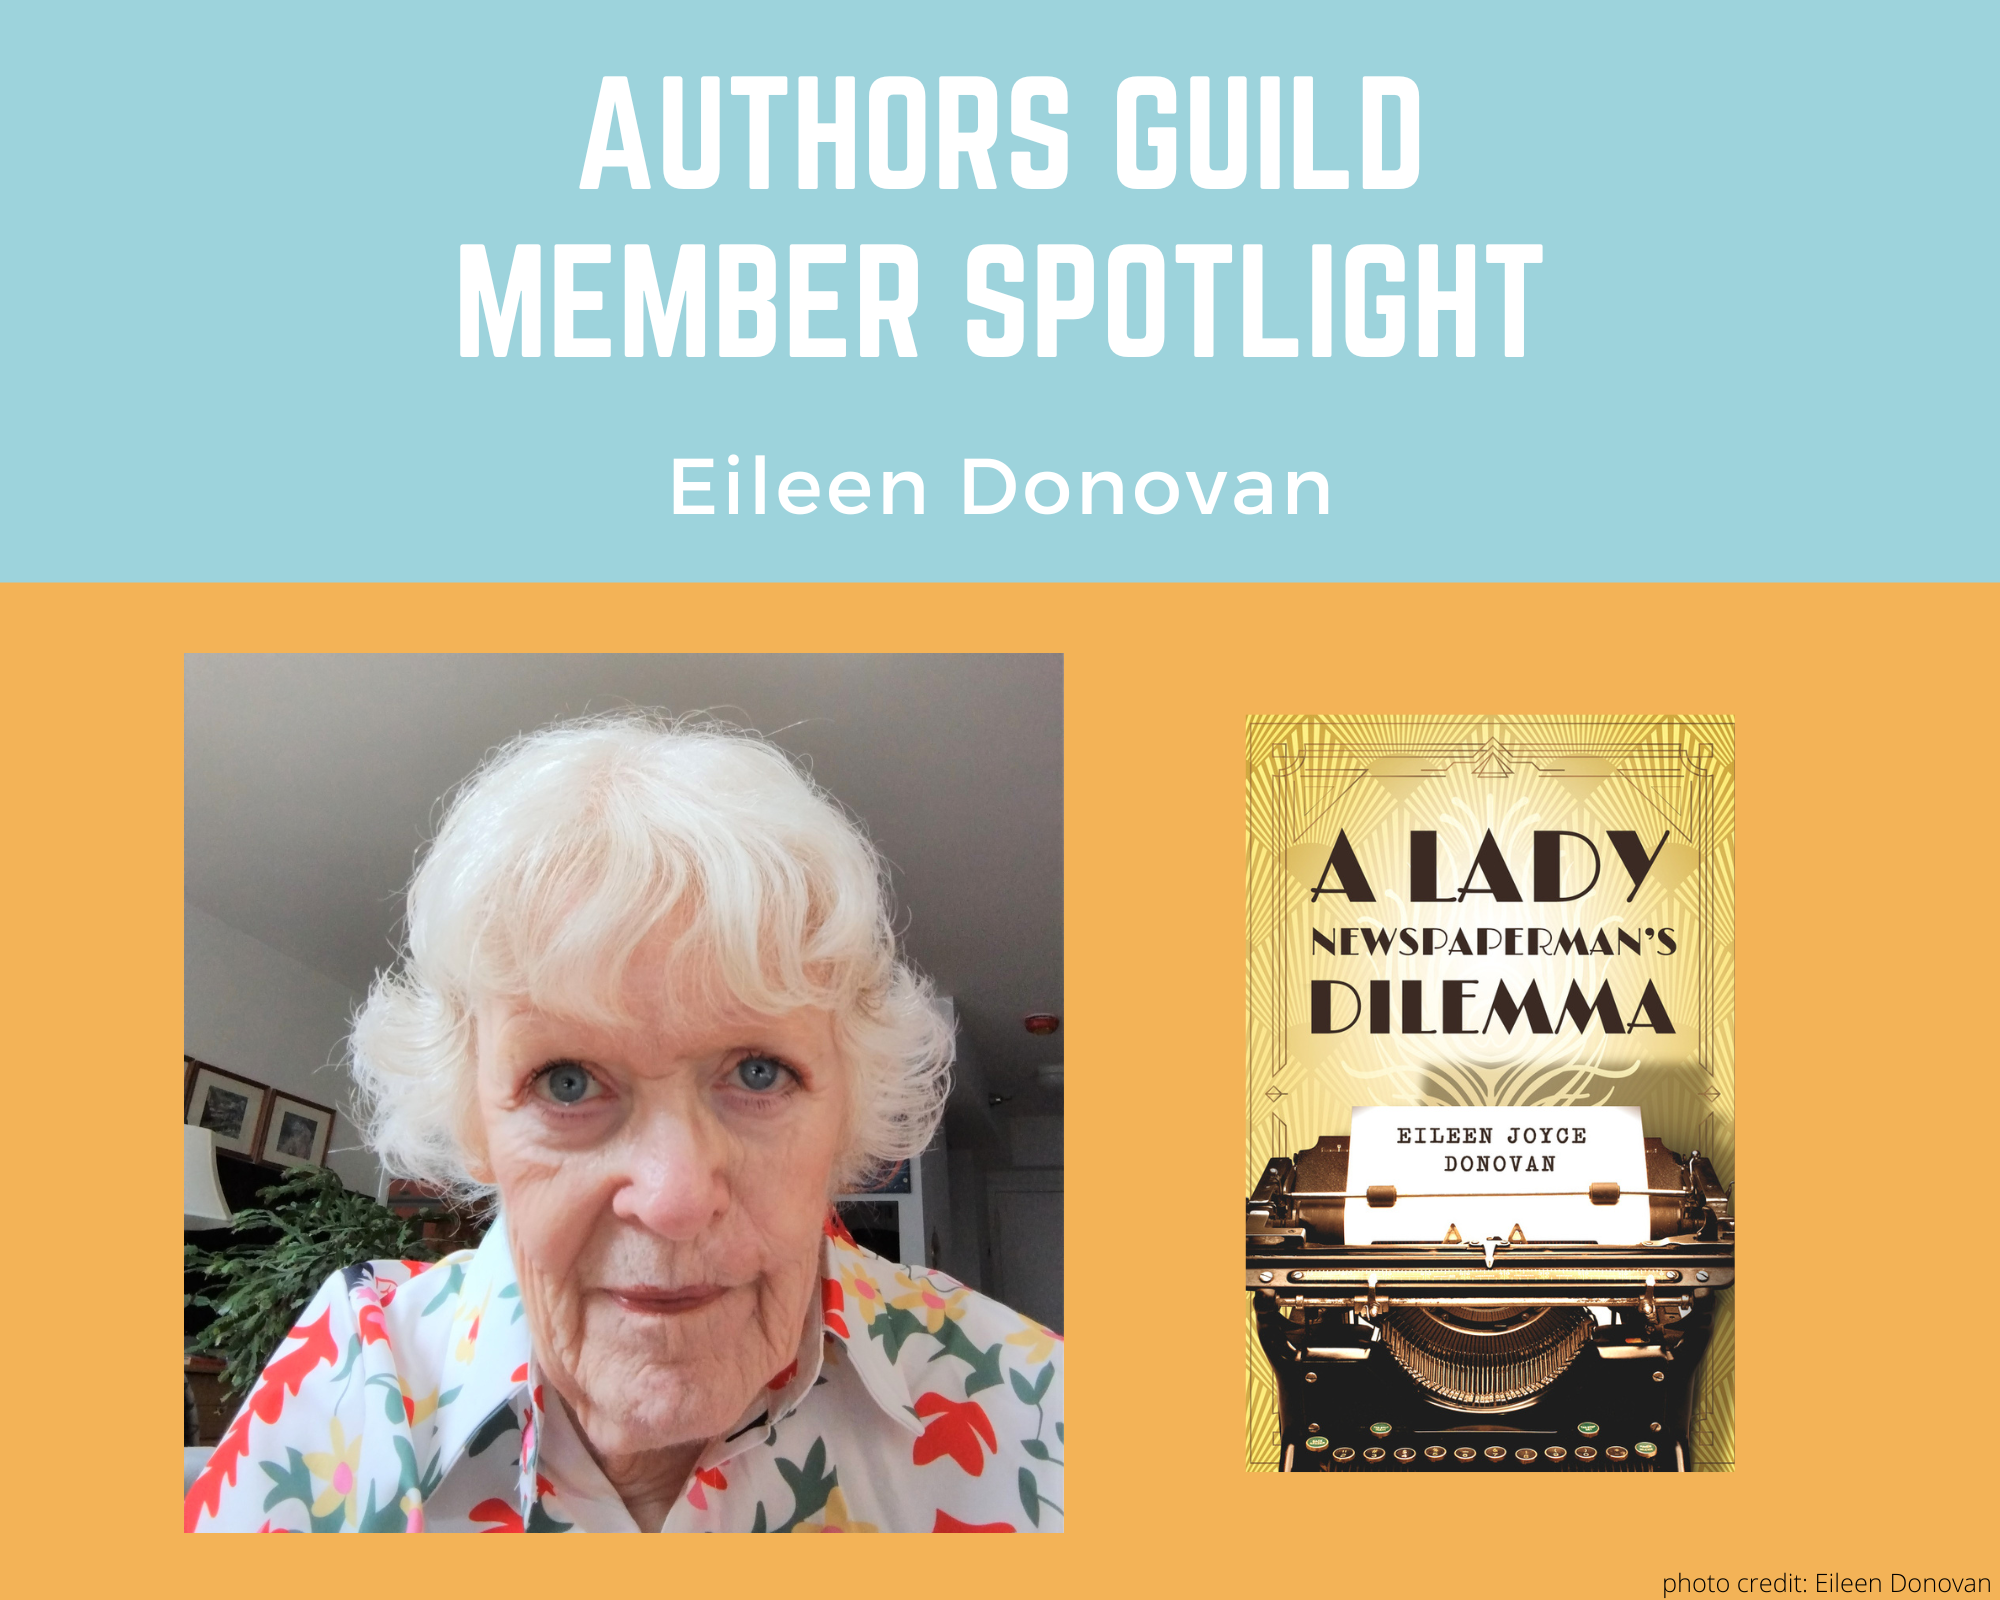 author Eileen Donovan looking directly at the camera and an image of her book A Lady Newspaperman's Dilemma